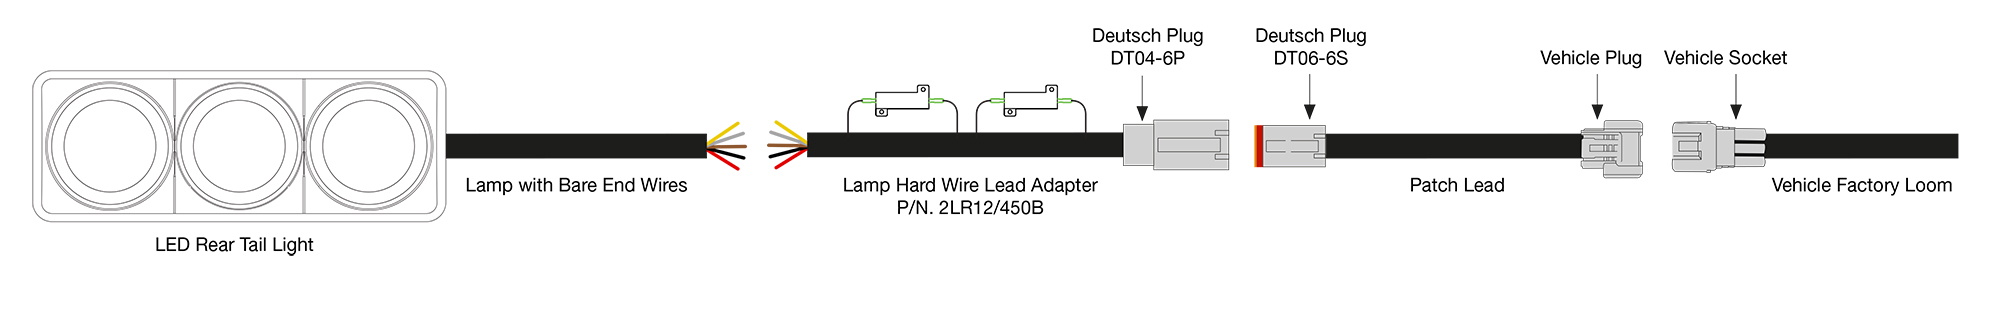 3 Lead Trailer Light Wiring Diagram from ledautolamps.com